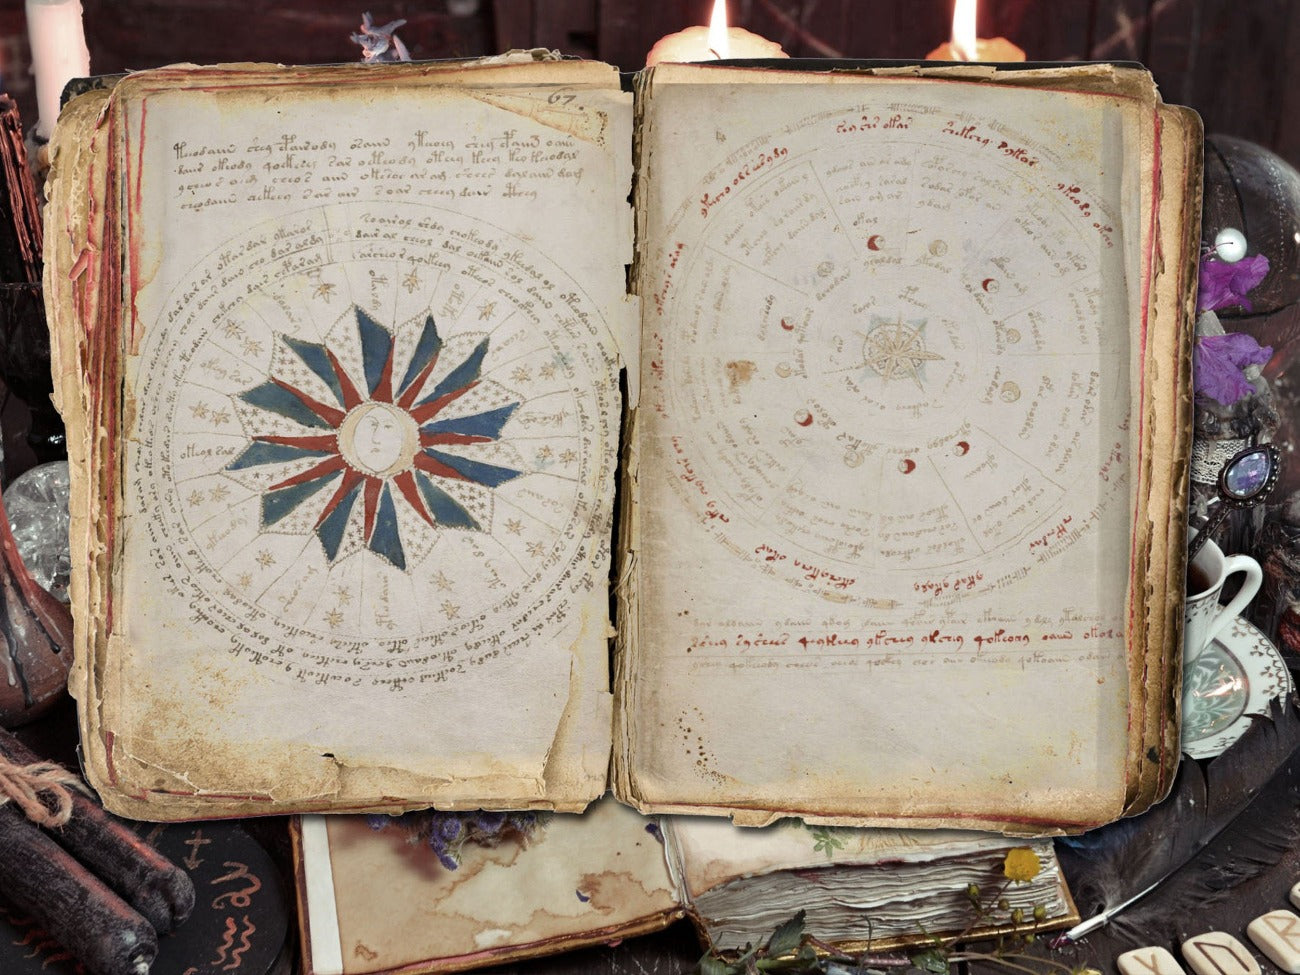 Voynich Manuscript pages shown placed in an open book -Morgana Magick Spell